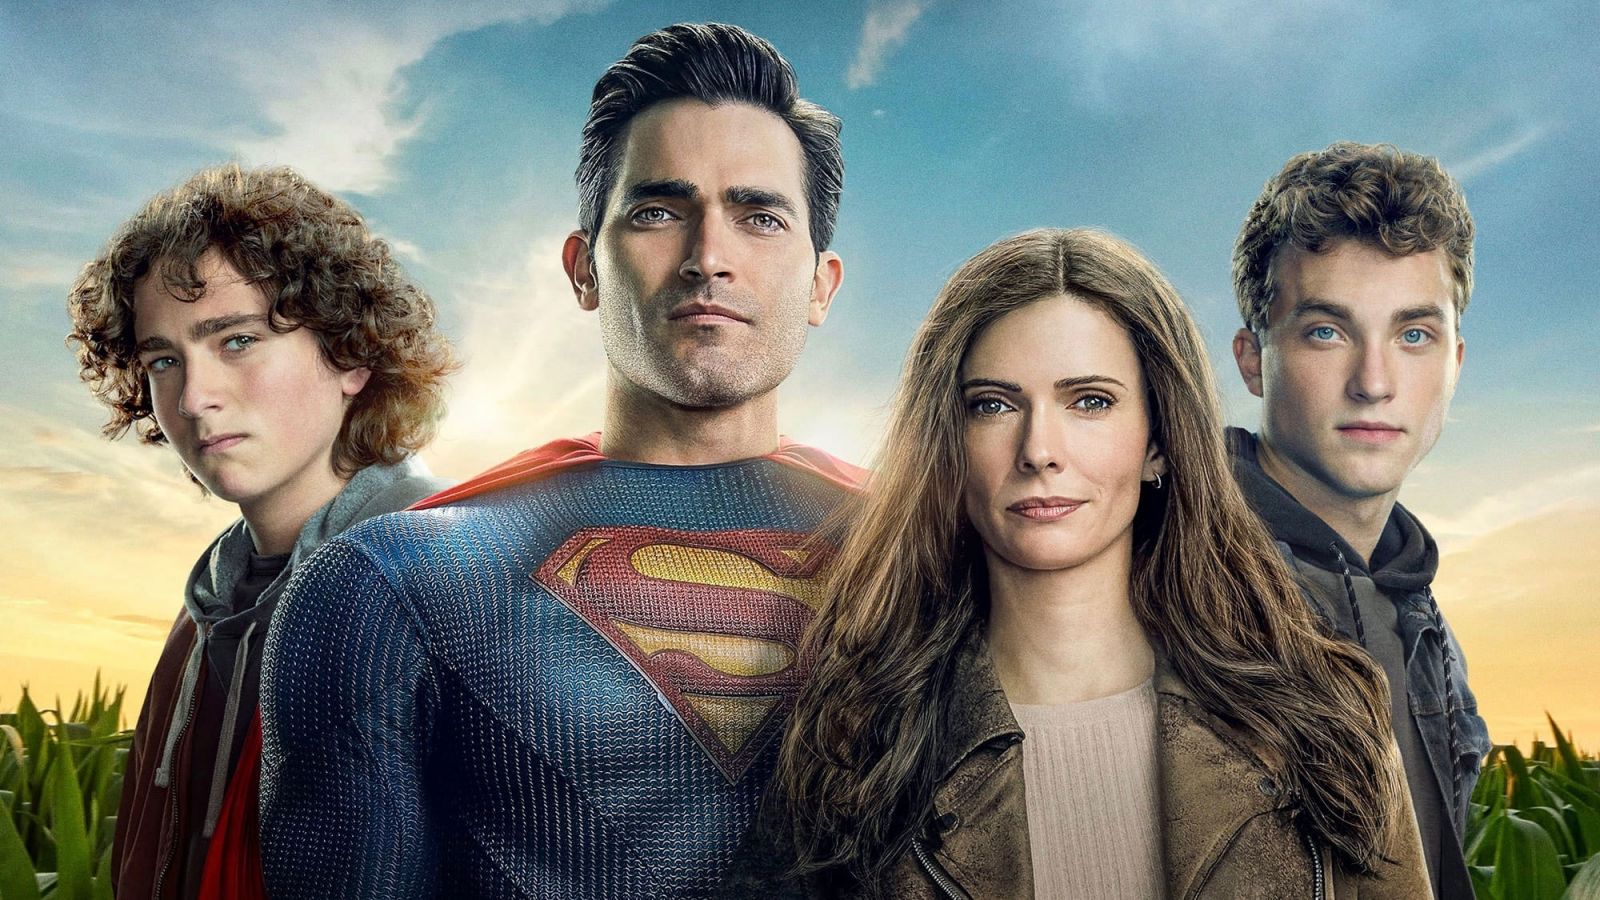 Superman and Lois 2021 Full Movies Free Watch Online